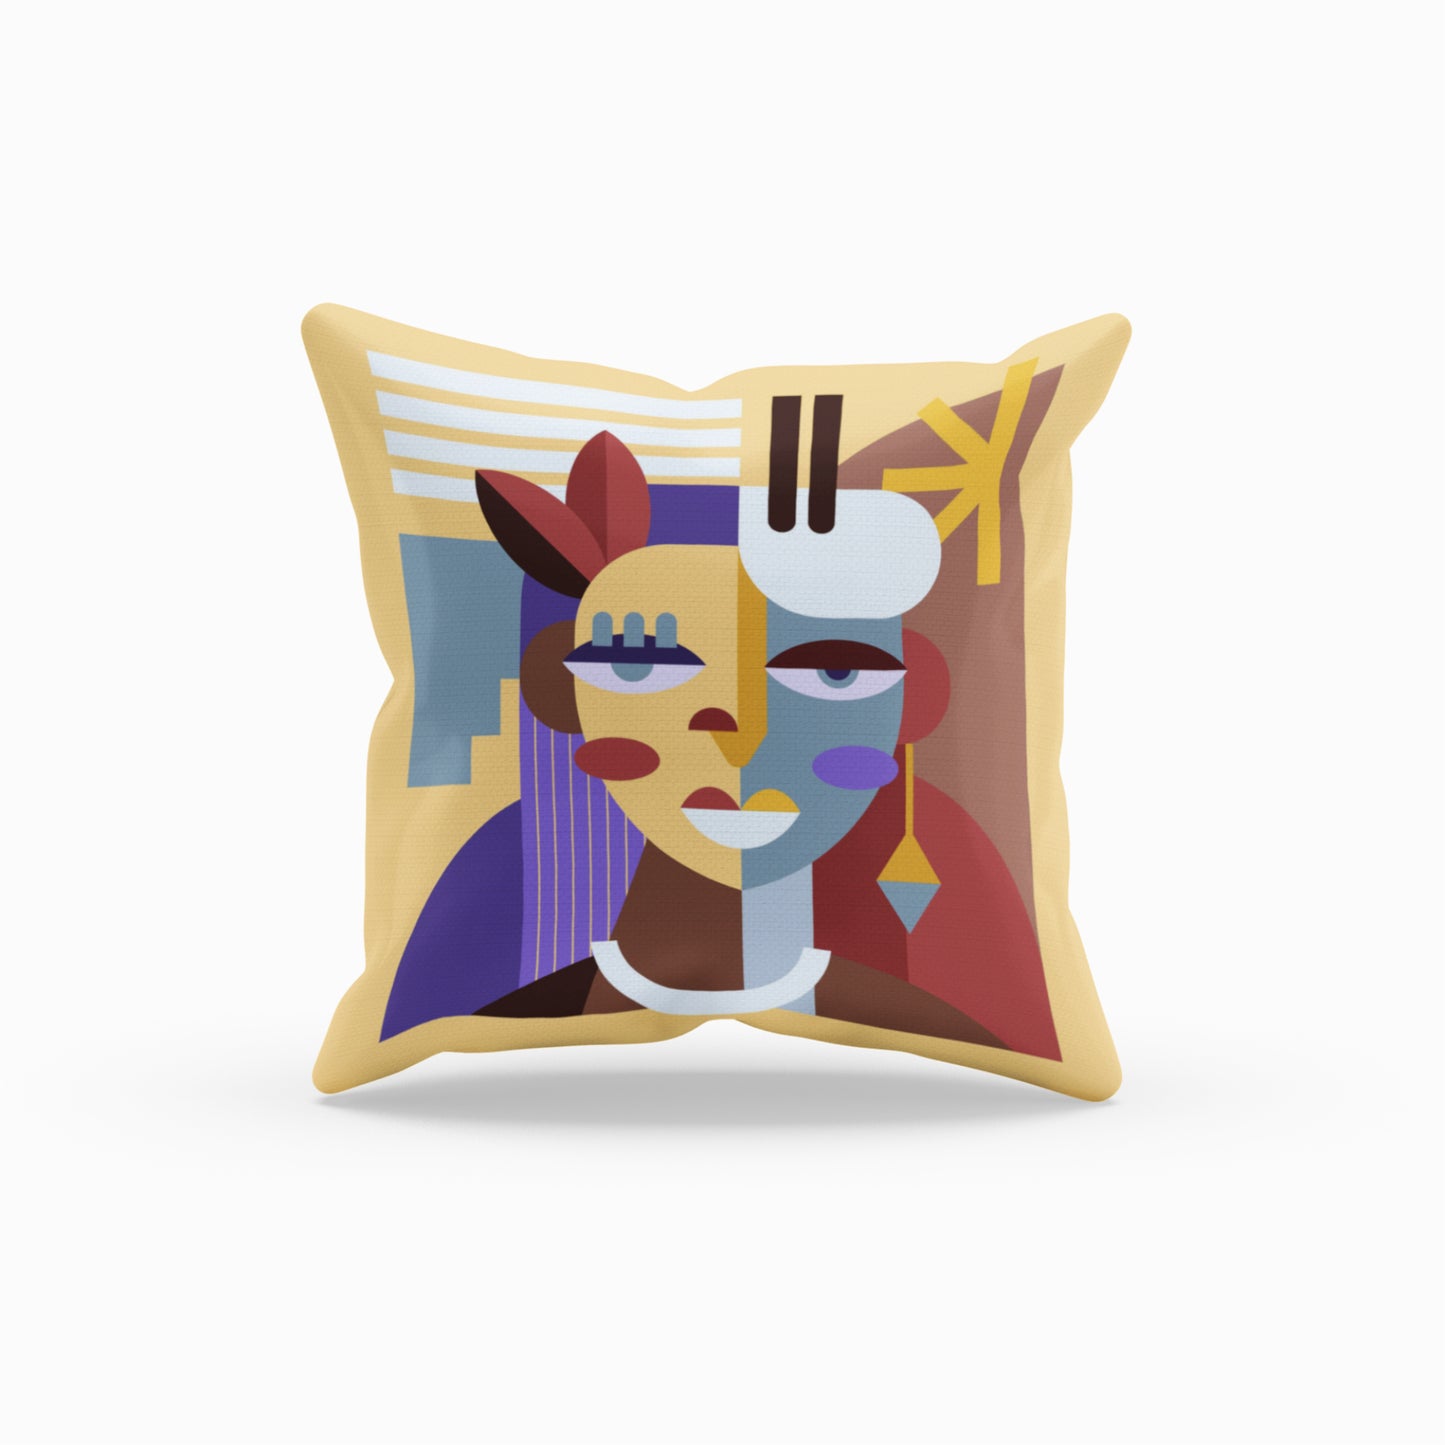 Abstract Face Throw Pillow, Boho Home Decor Cushion Cover by Homeezone